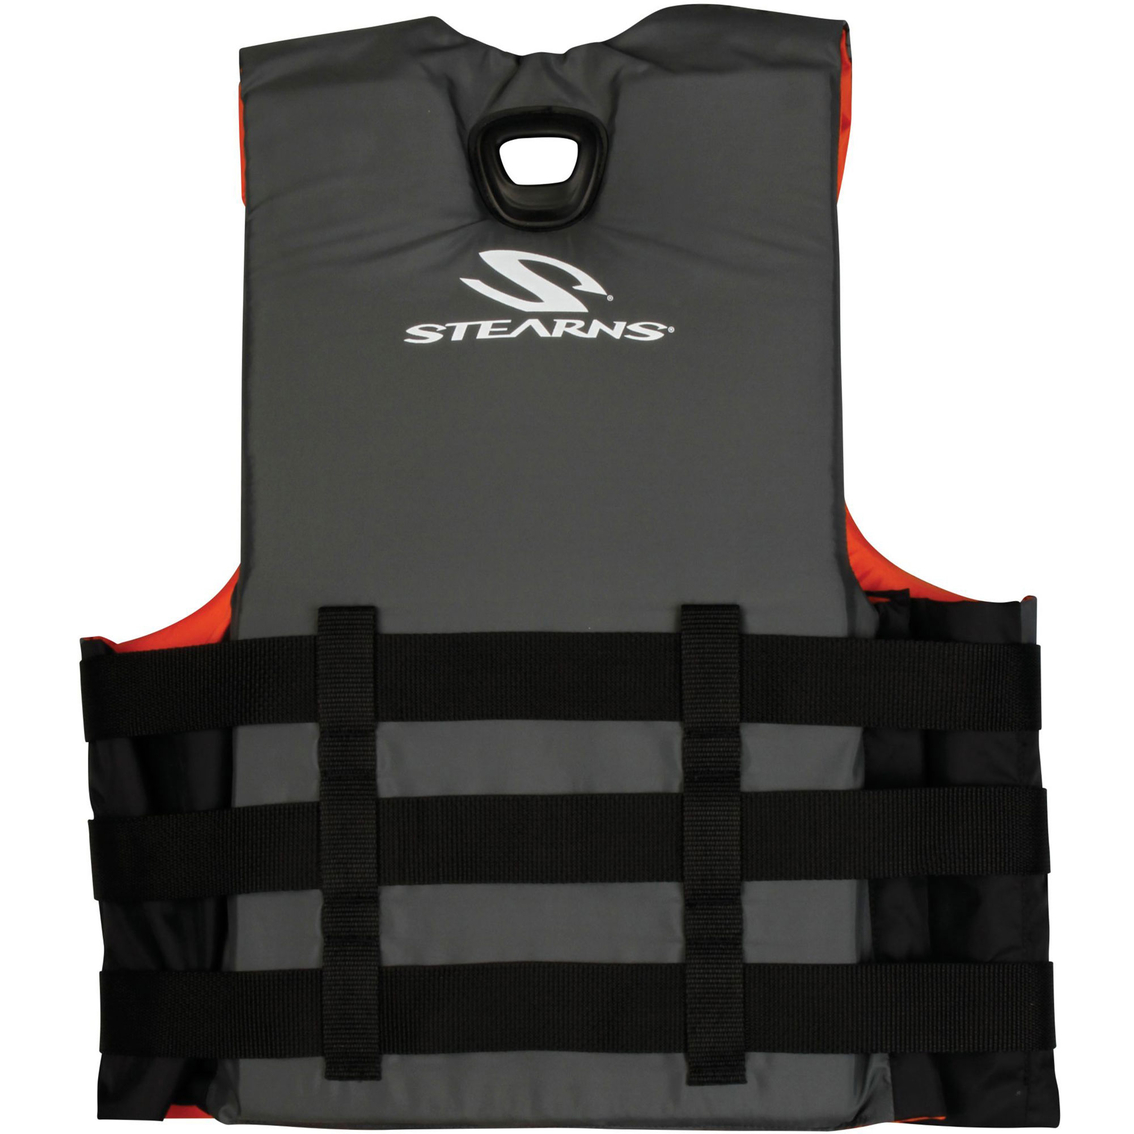 Stearns Infinity Series Abstract Wave Life Jacket, L/XL - Image 2 of 2